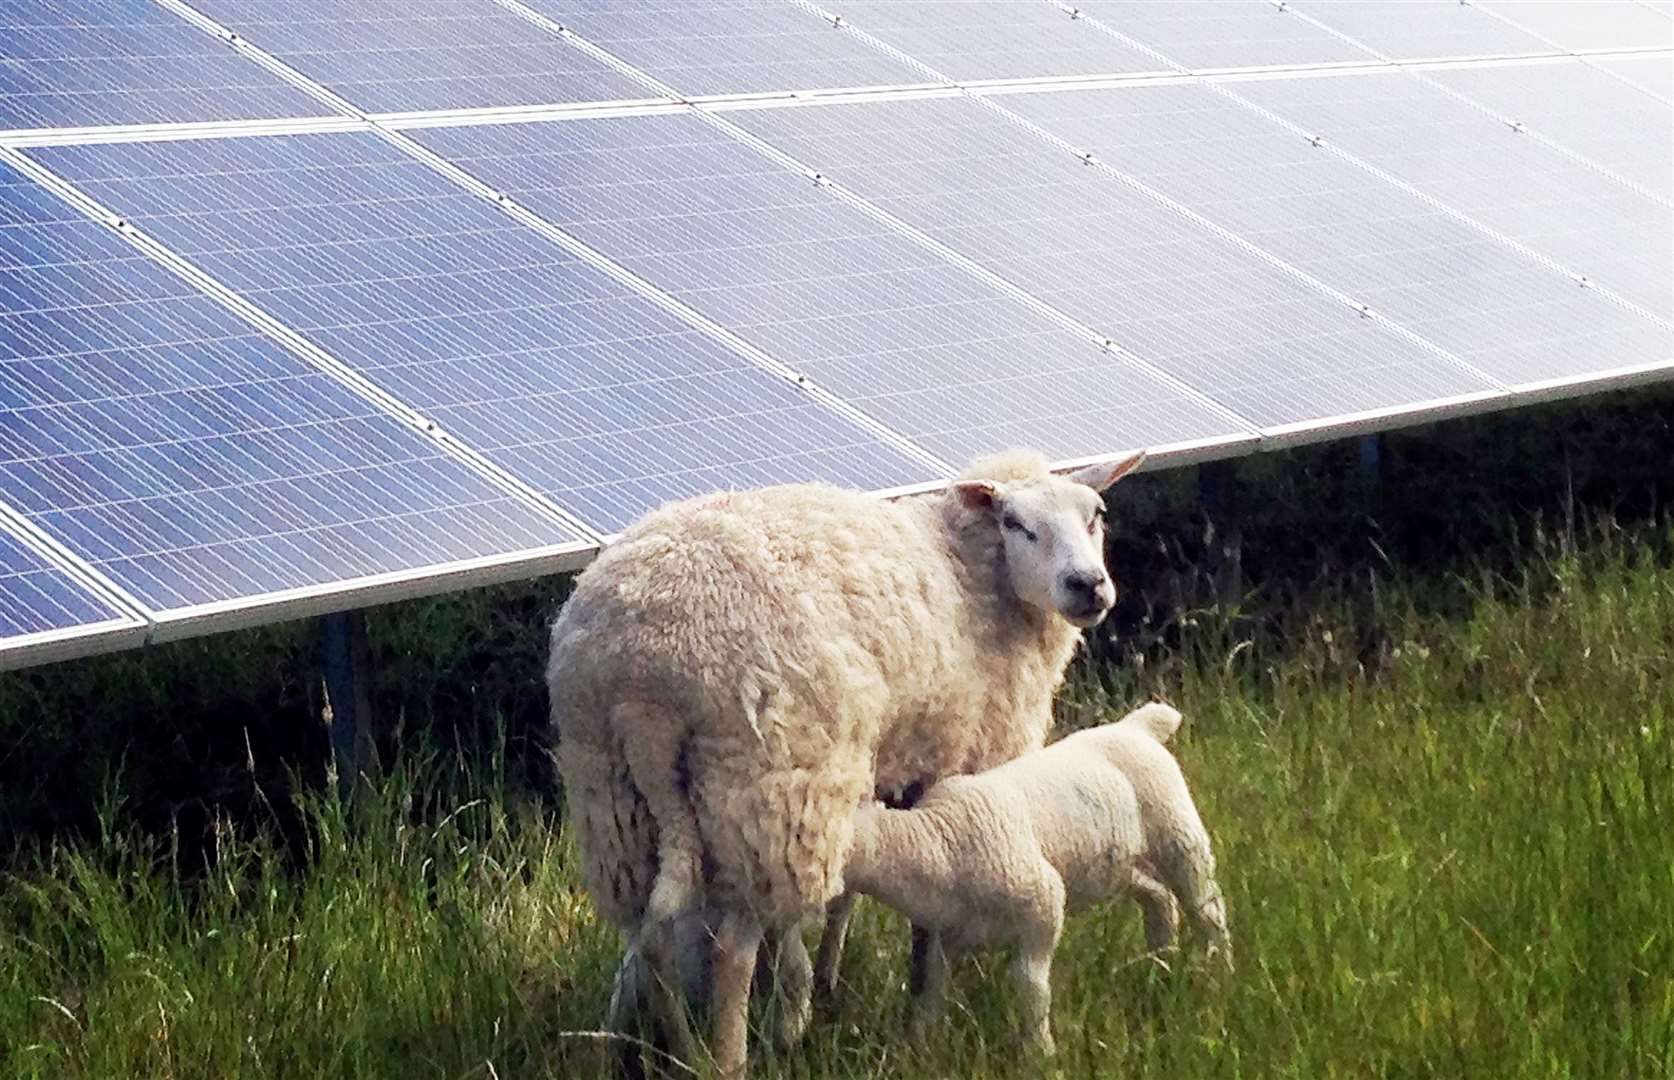 Sheep can frequently be seen grazing around the base of solar panels in farmers’ fields